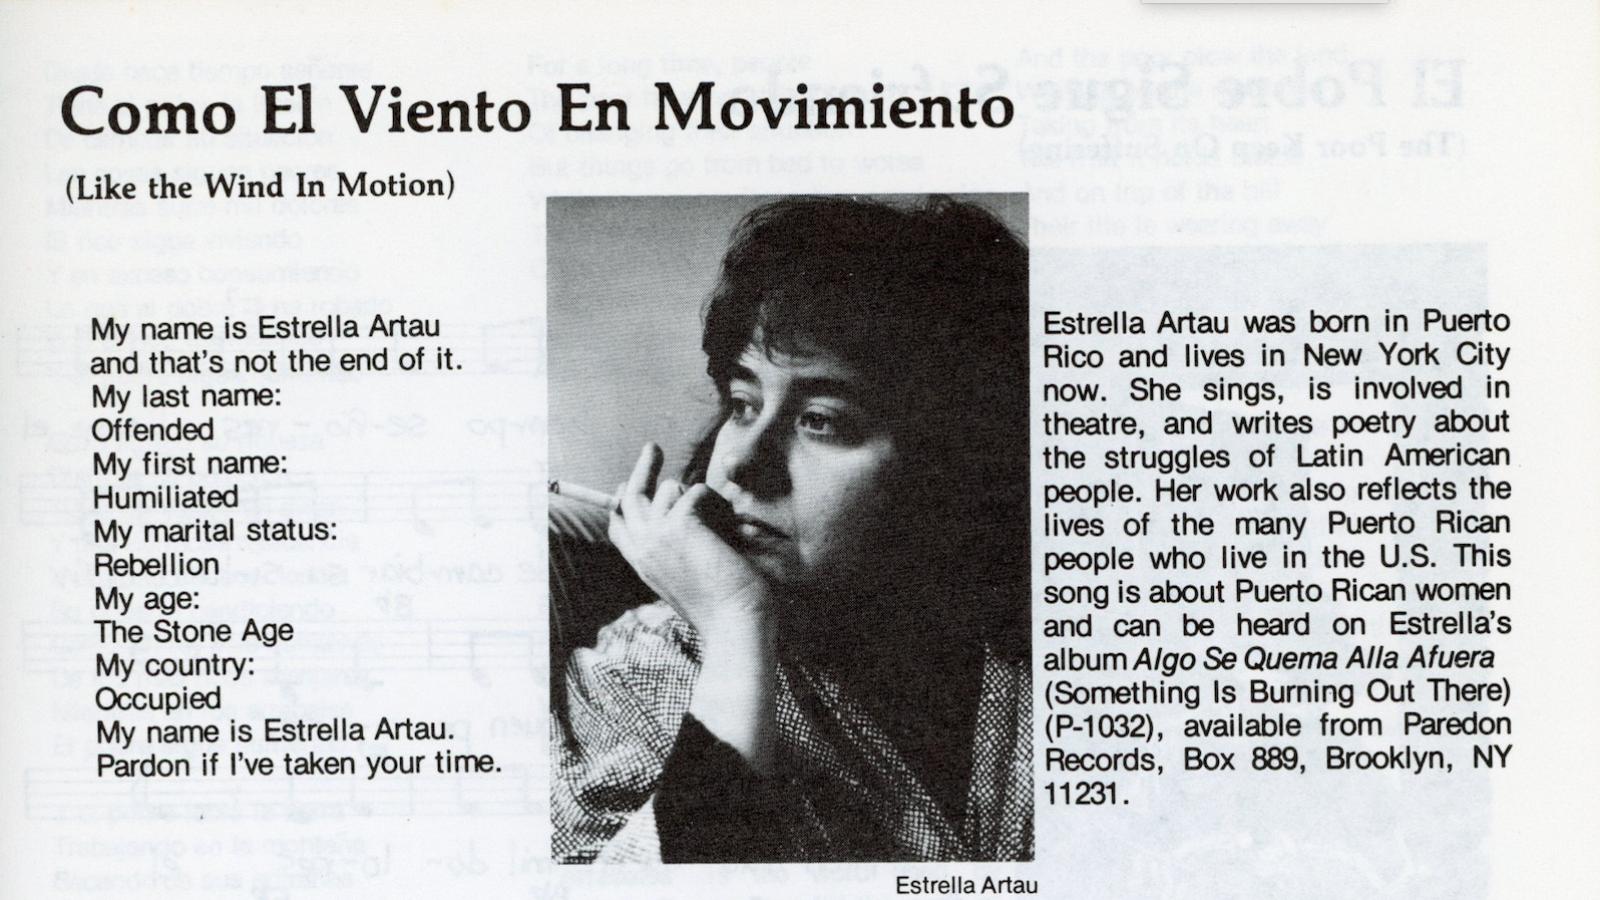 Photo and biography of Estrella Artau, a Puerto Rican folk singer next to an autobiographical poem. She is featured for her song Como El Vent En Movimiento (Like the Wind in Motion)